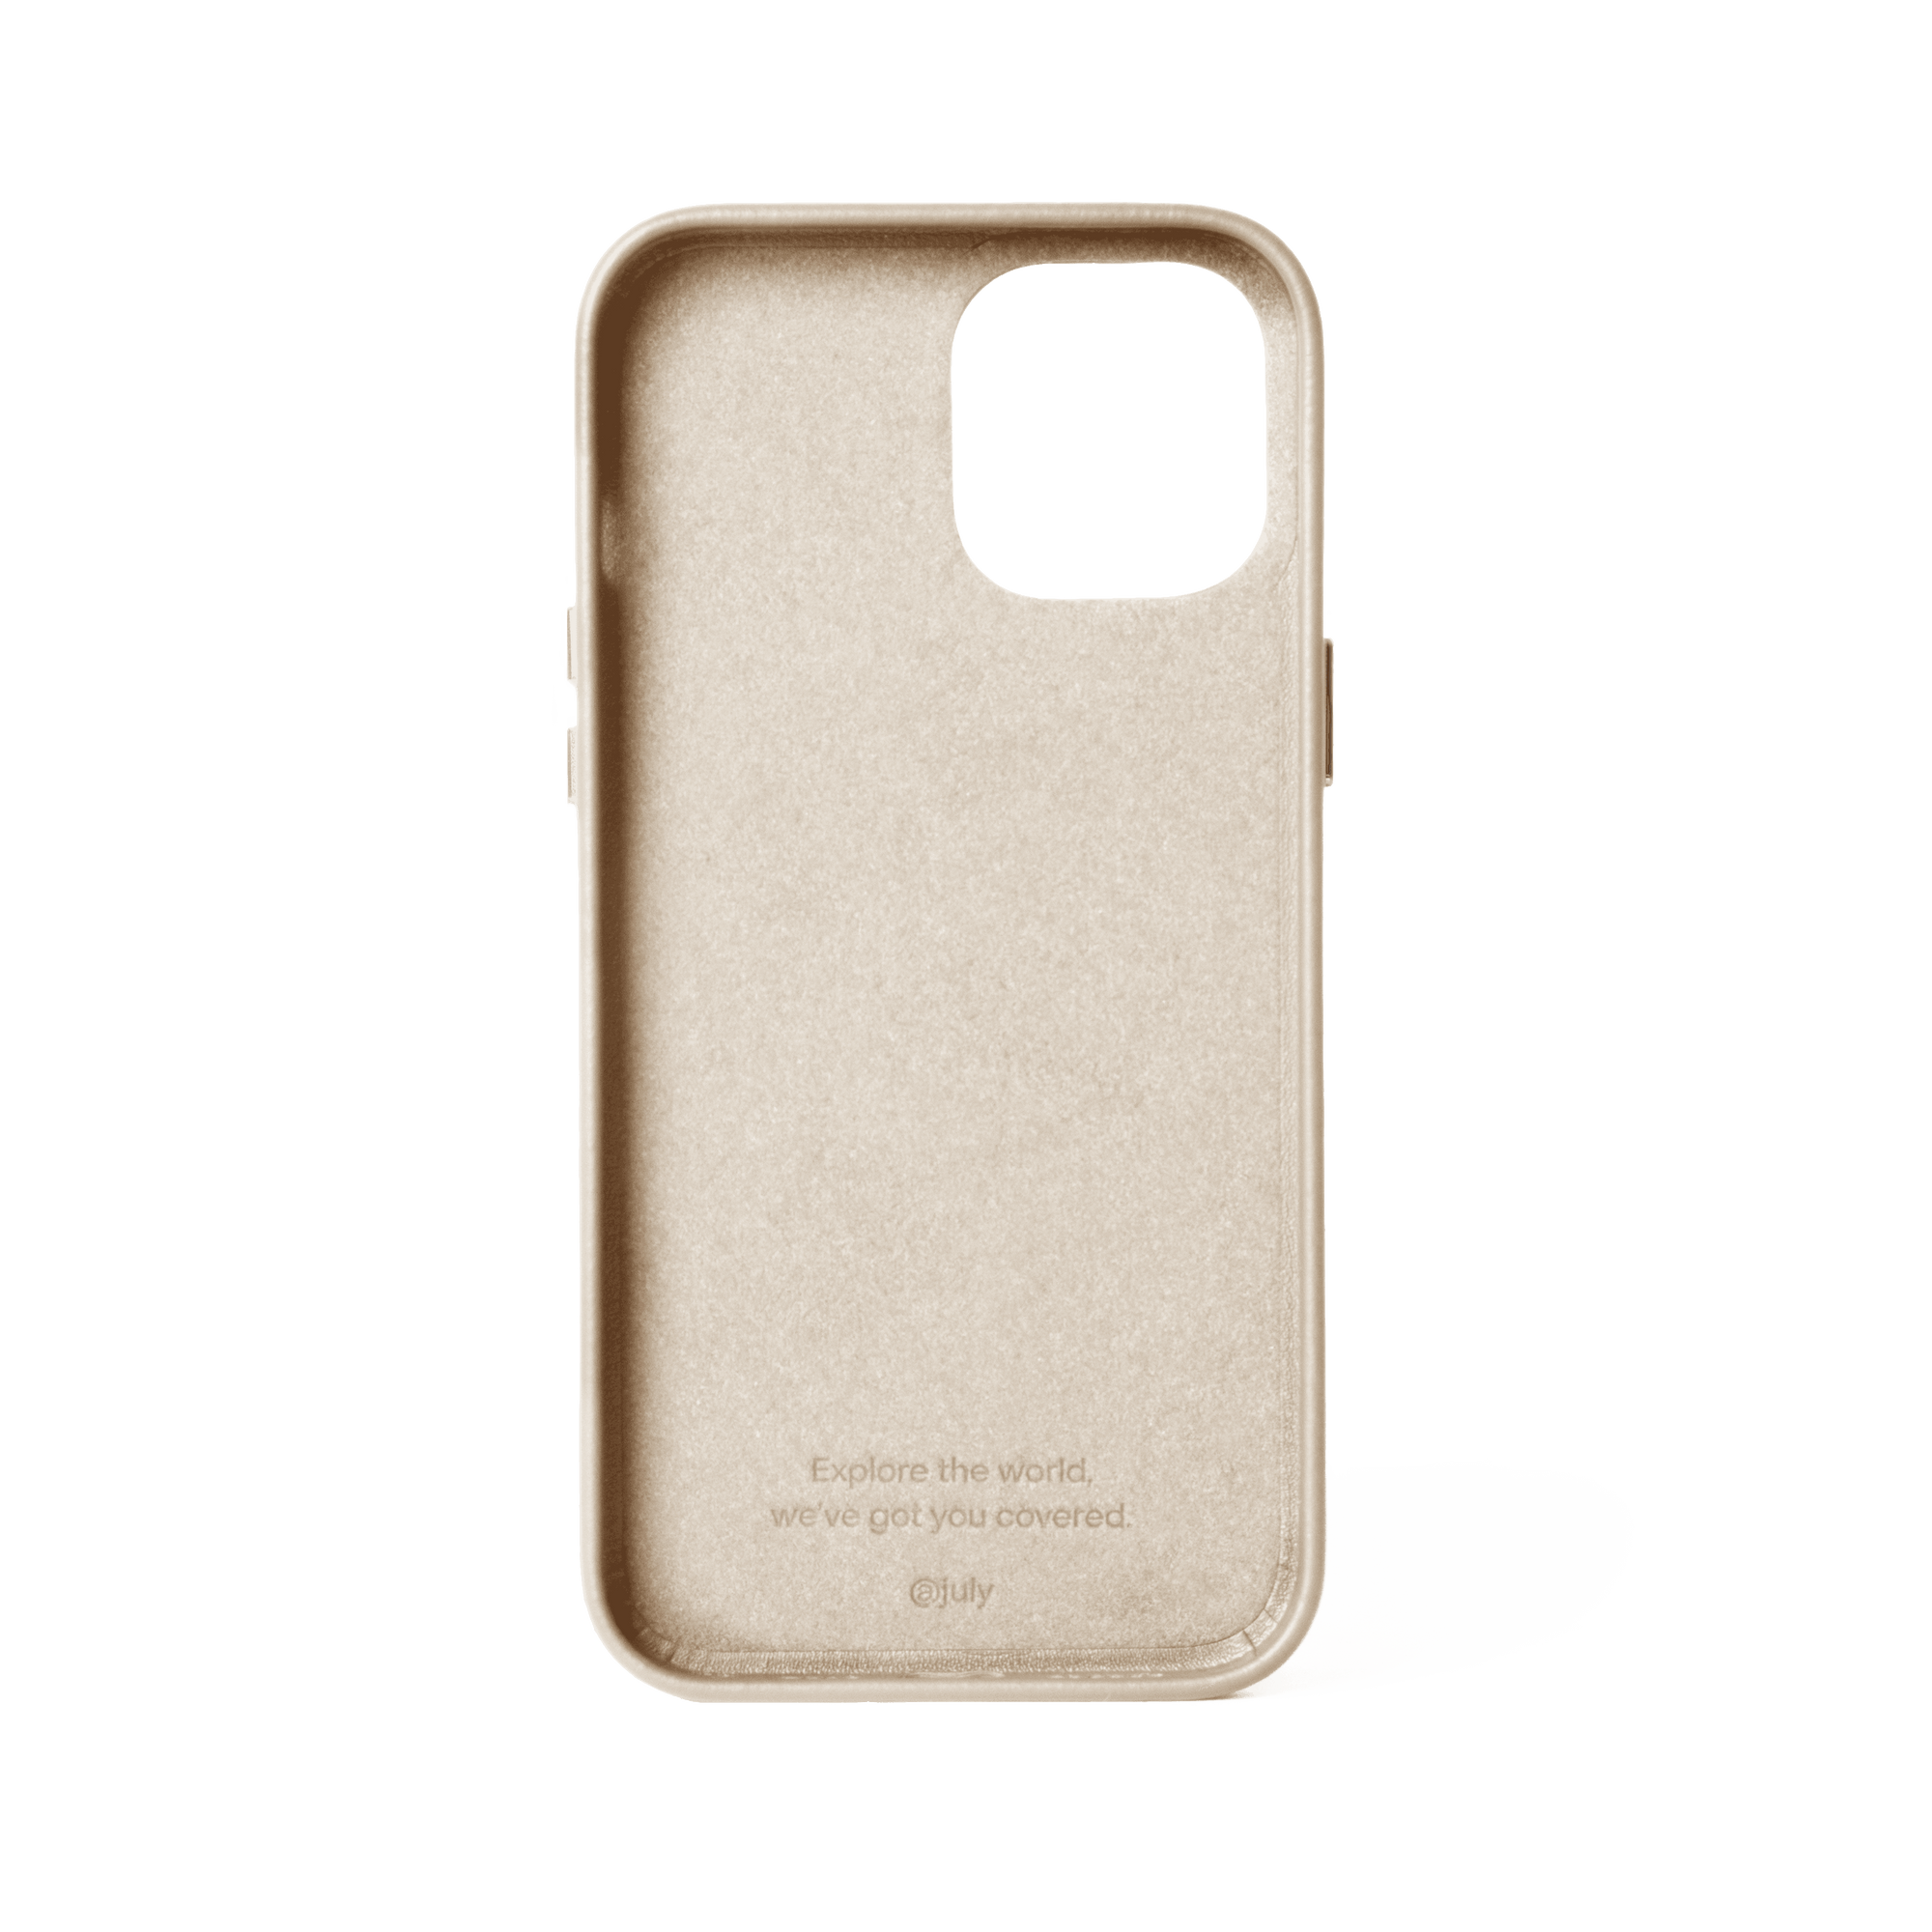 Personalised MagSafe iPhone 12 / 12 Pro Leather Case | July